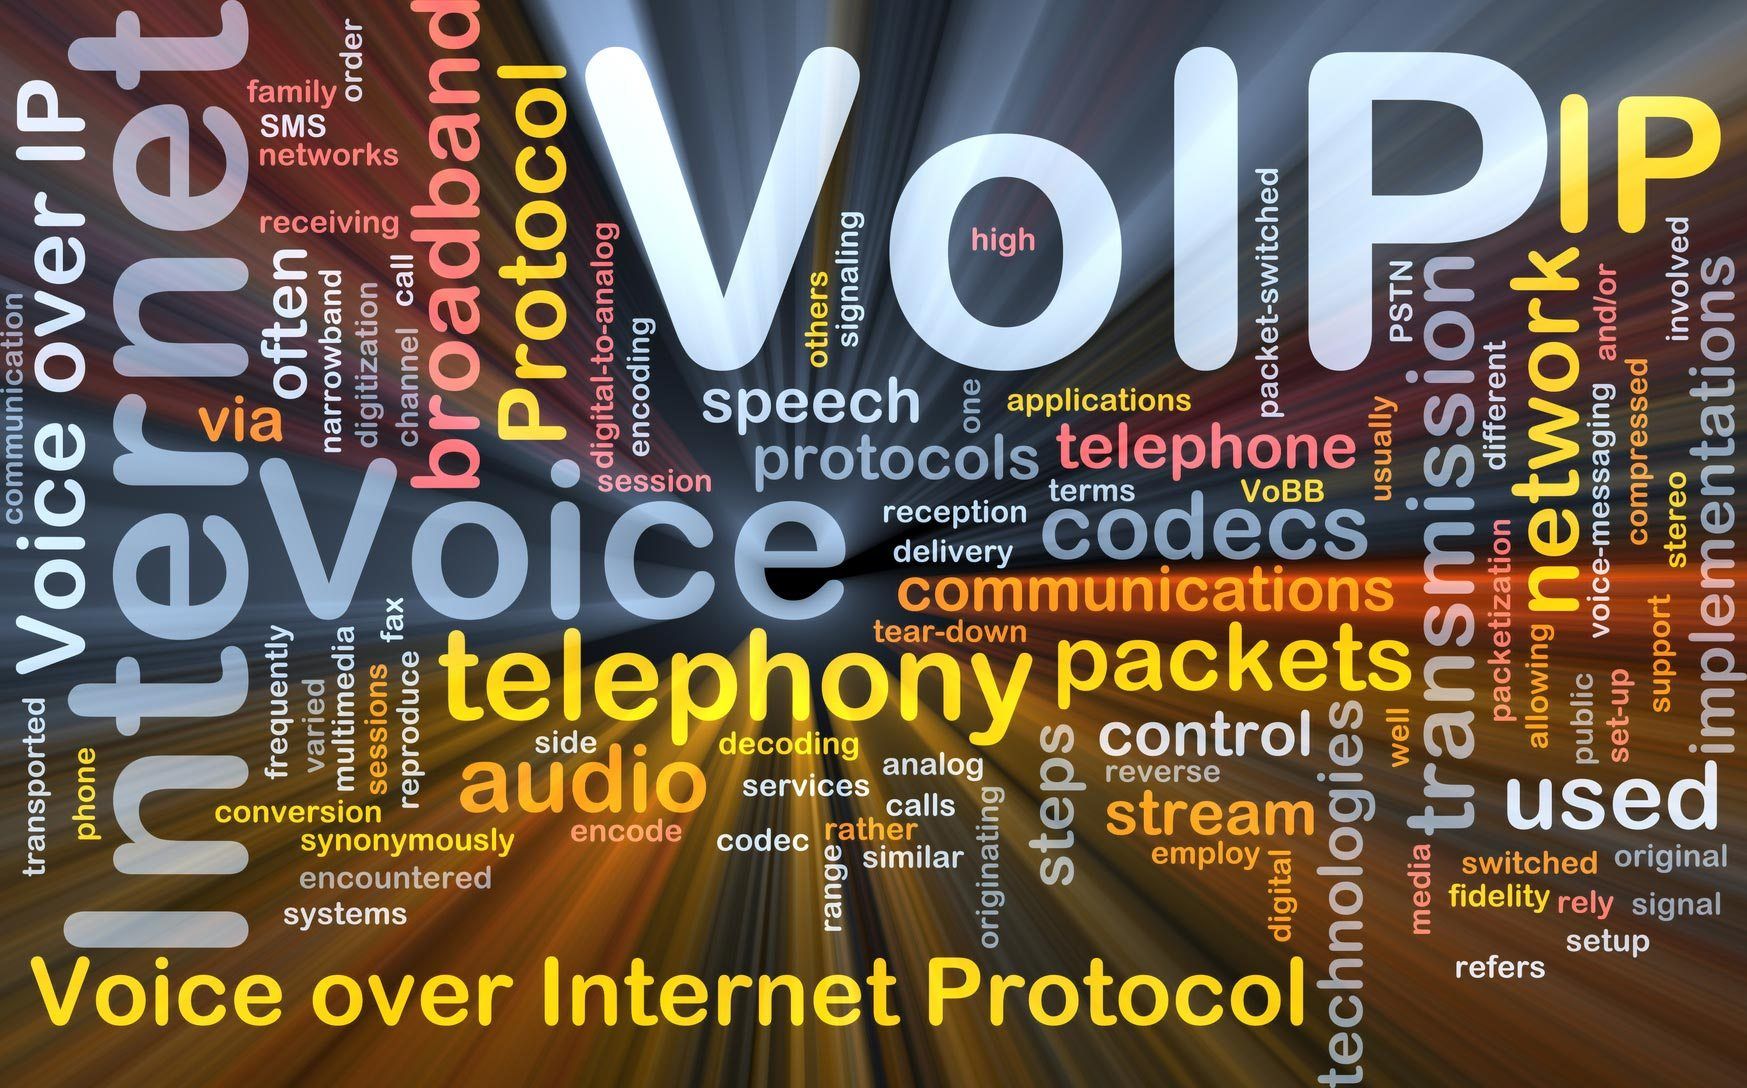 protect your voip from cyber attacks with multi layered defenses